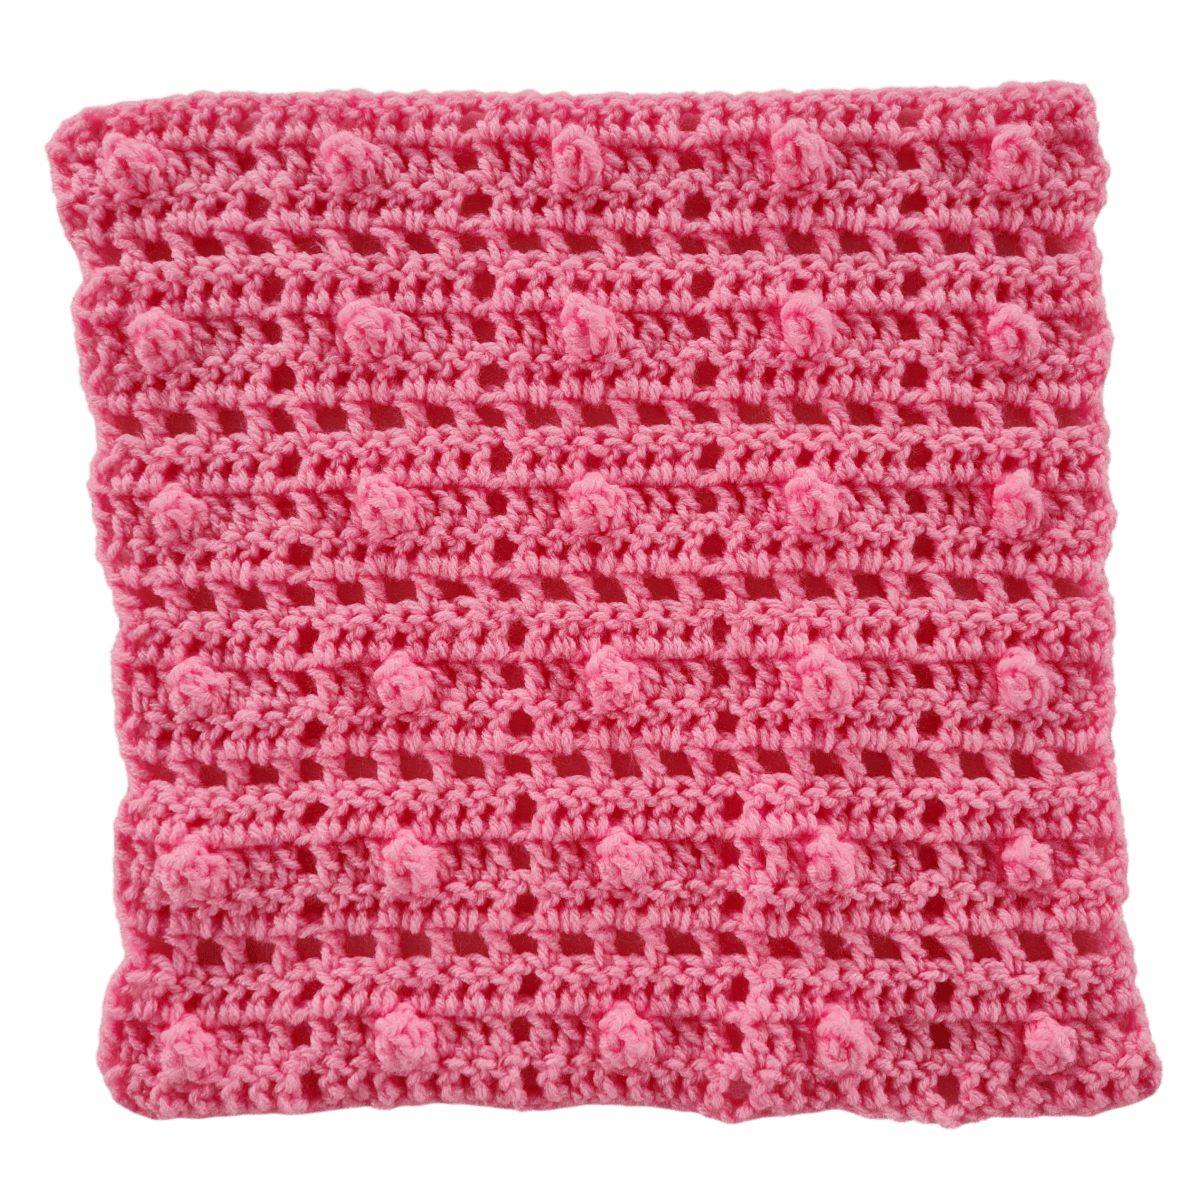 Berry Biscuit Square - Part 1 - Secret Stitches CAL 2021 - The Secret Yarnery